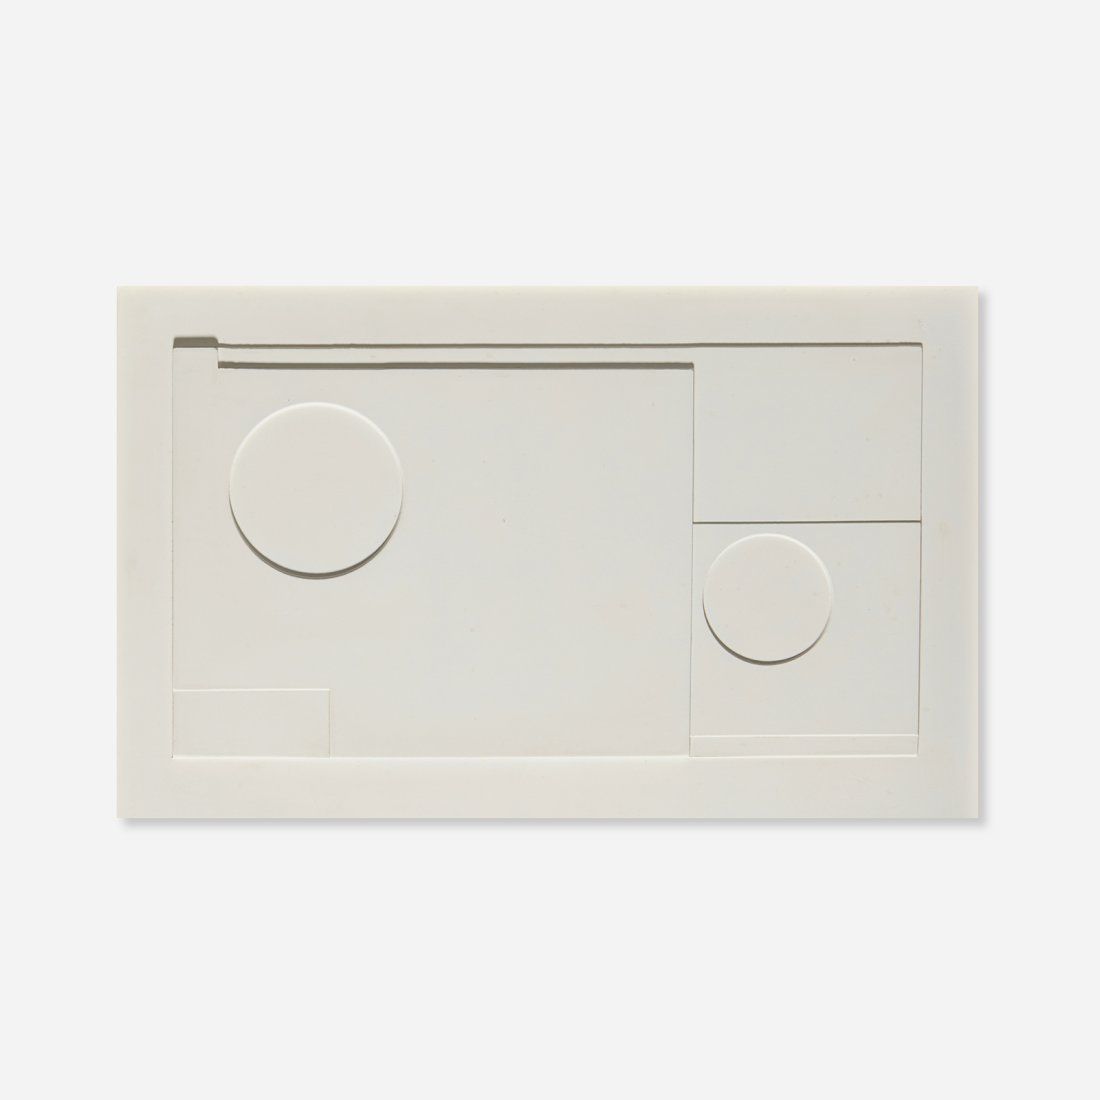 Ben Nicholson, ‘White Relief,’ which hammered for $11,000 and sold for $14,410 with buyer’s premium at Wright.